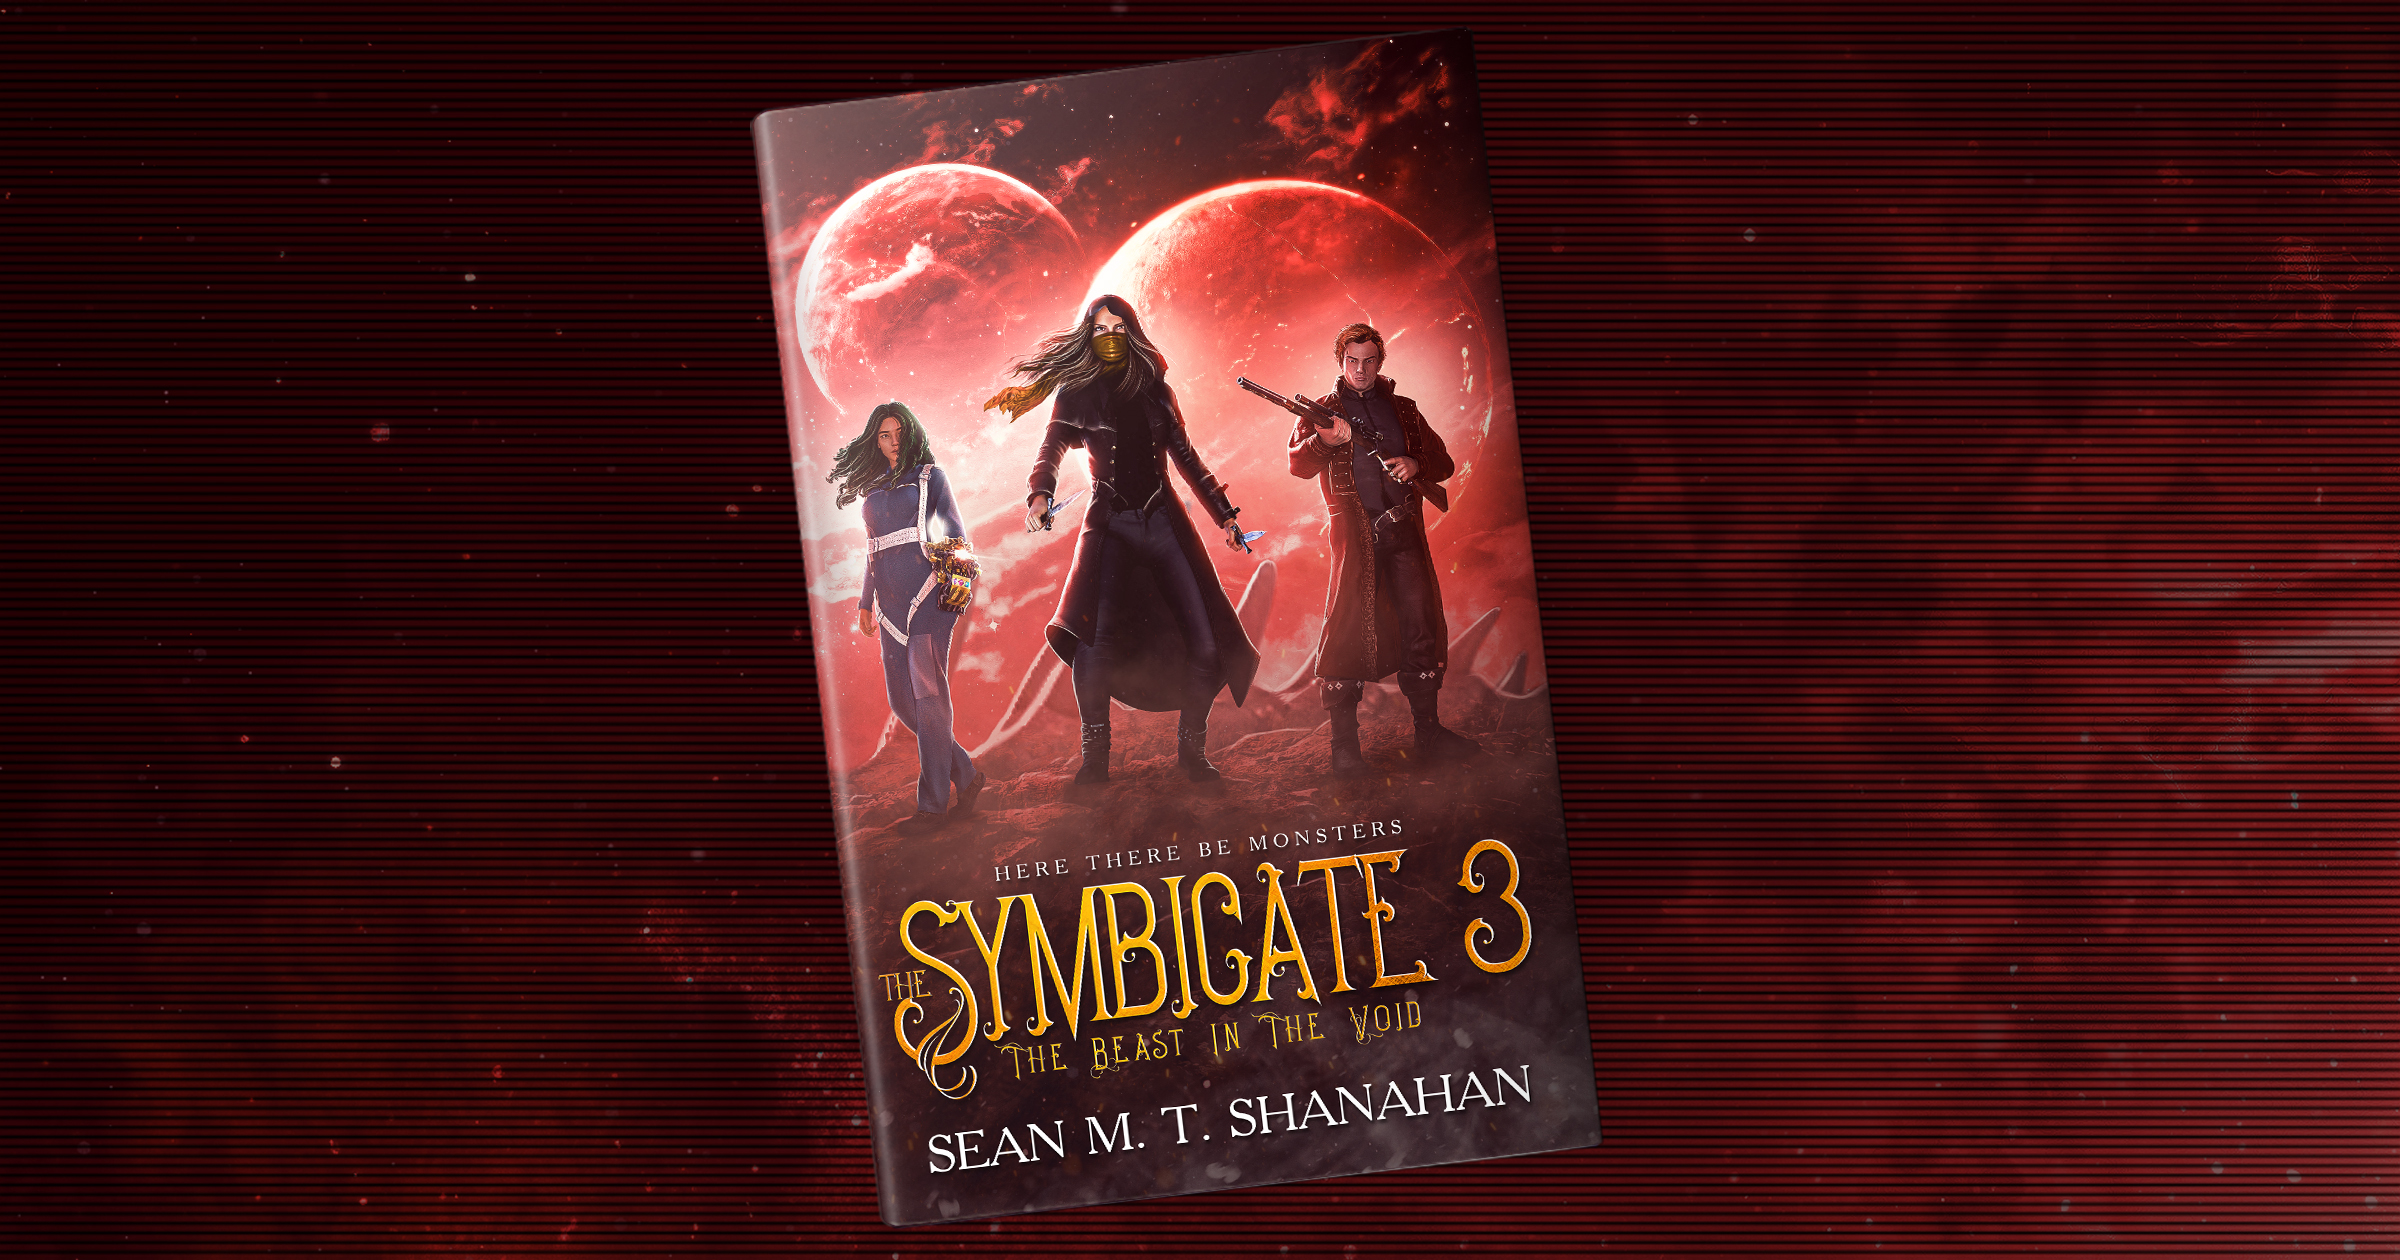 The Symbicate 3 – RELEASE DATE!